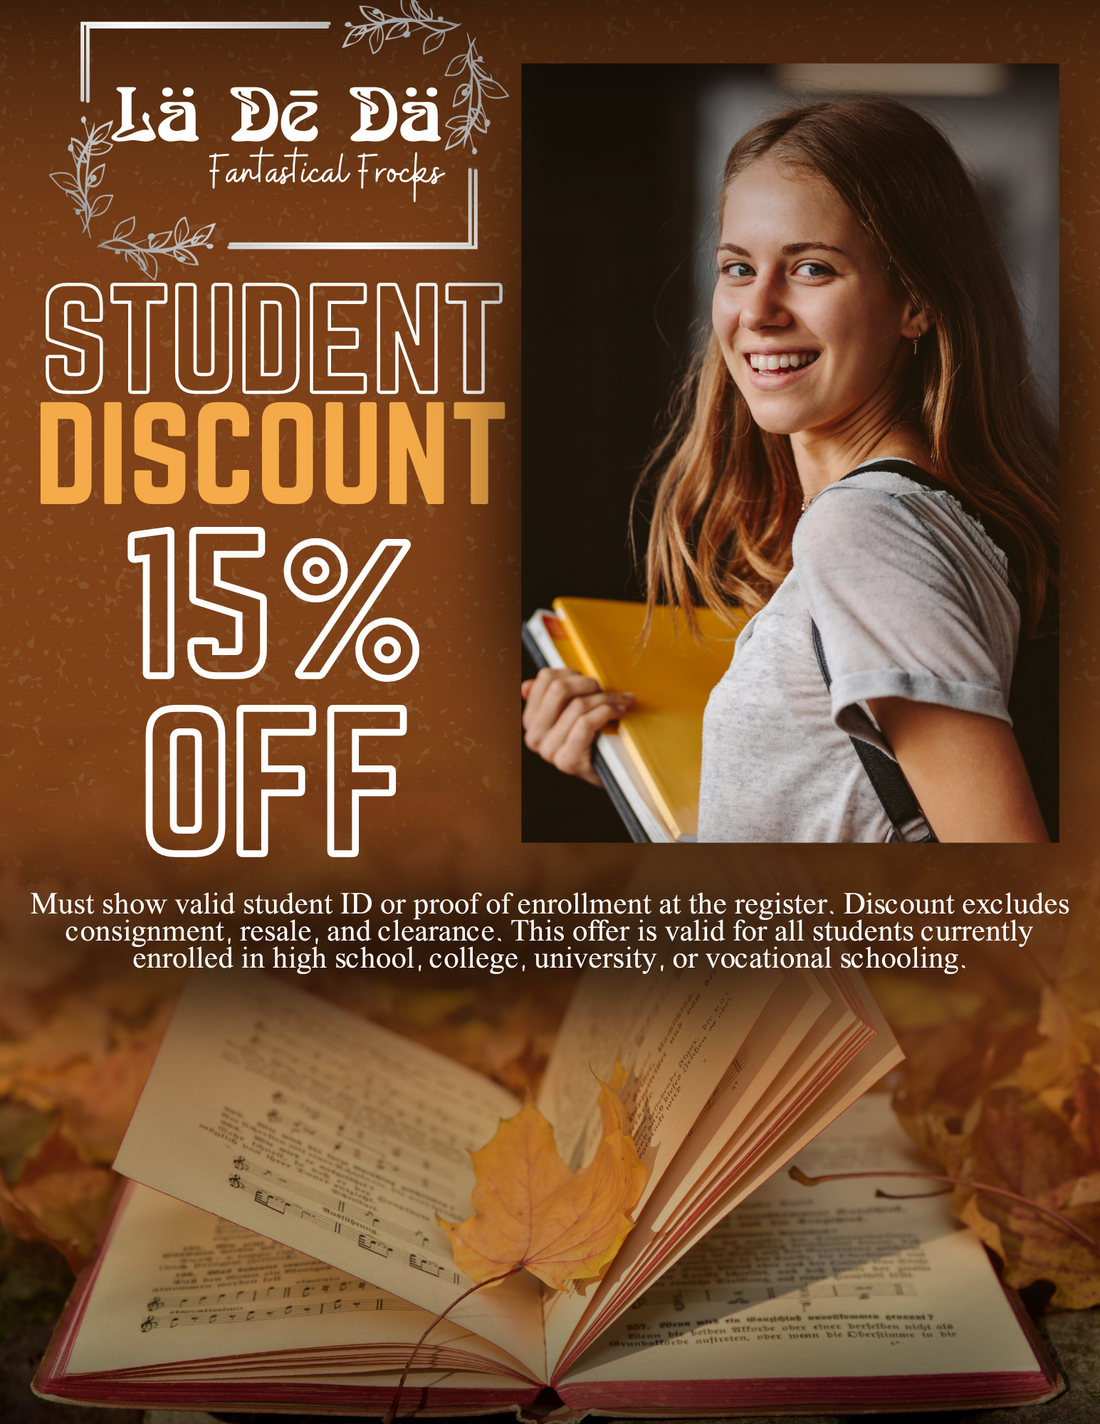 Exciting News: Introducing Student Discount at Our Store!